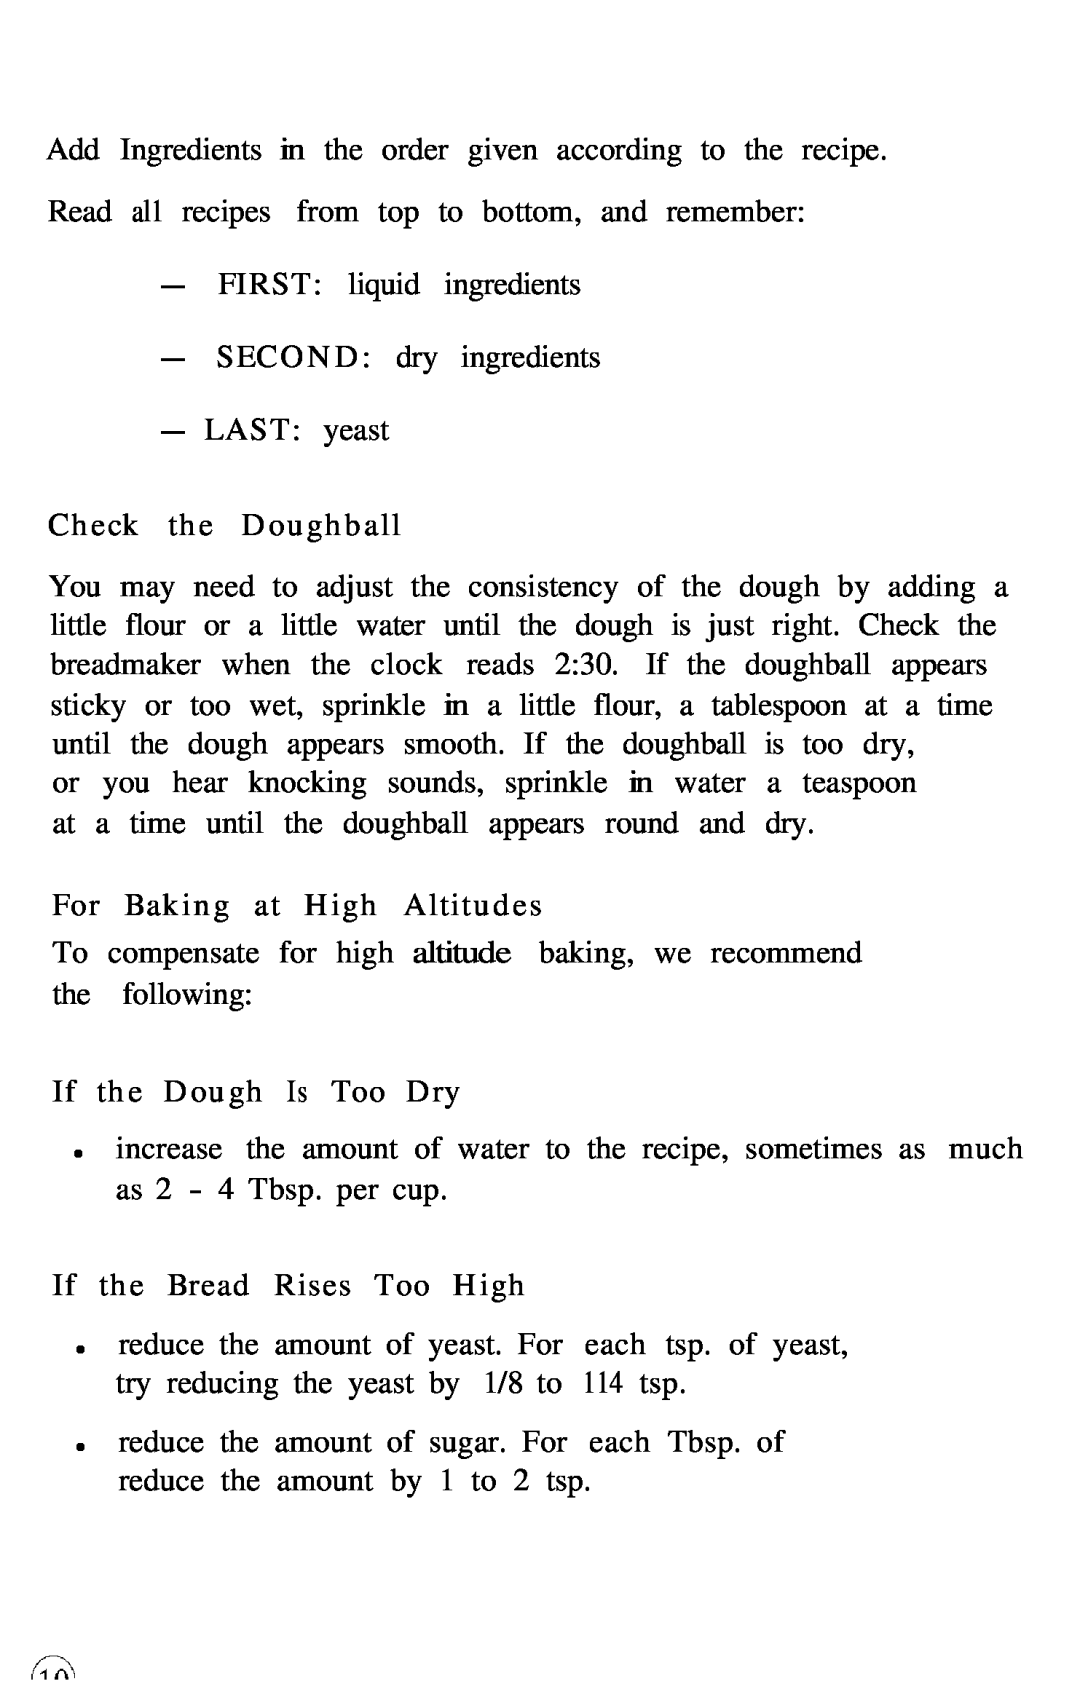 Oster 5858 manual LAST yeast Check the Doughball, For Baking at High Altitudes, If the Dough Is Too Dry 